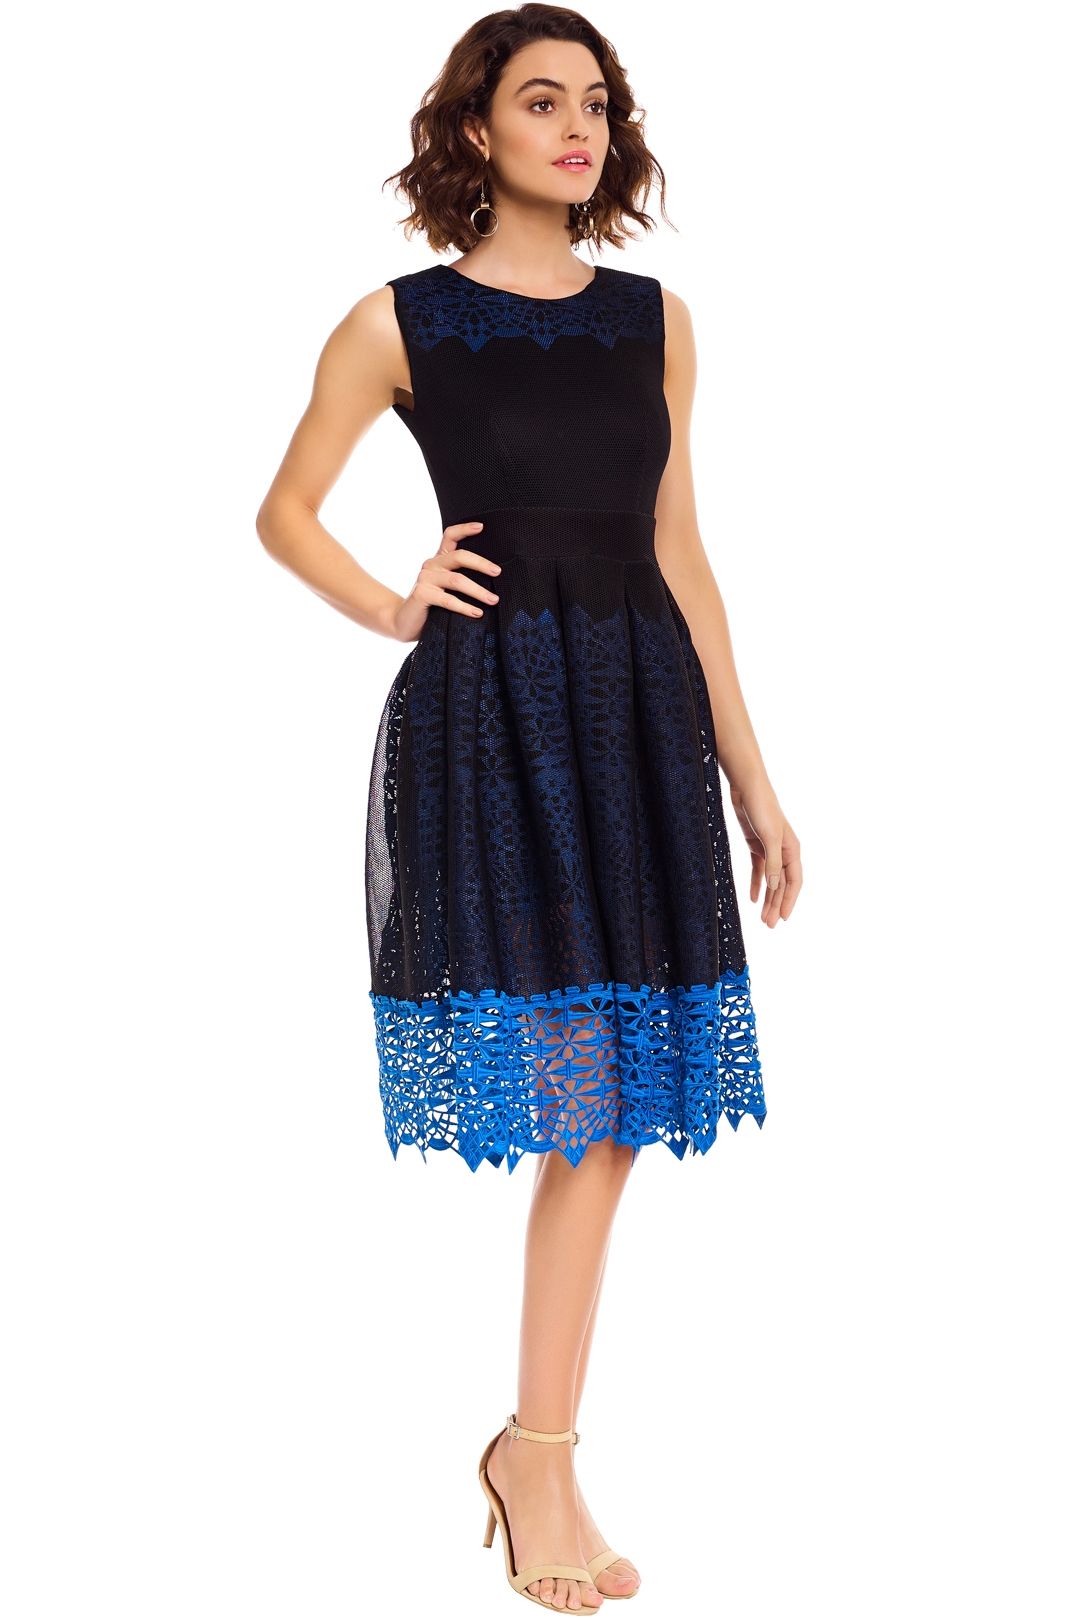 Russe Honeycomb Knit and Guipure Dress by Maje for Hire